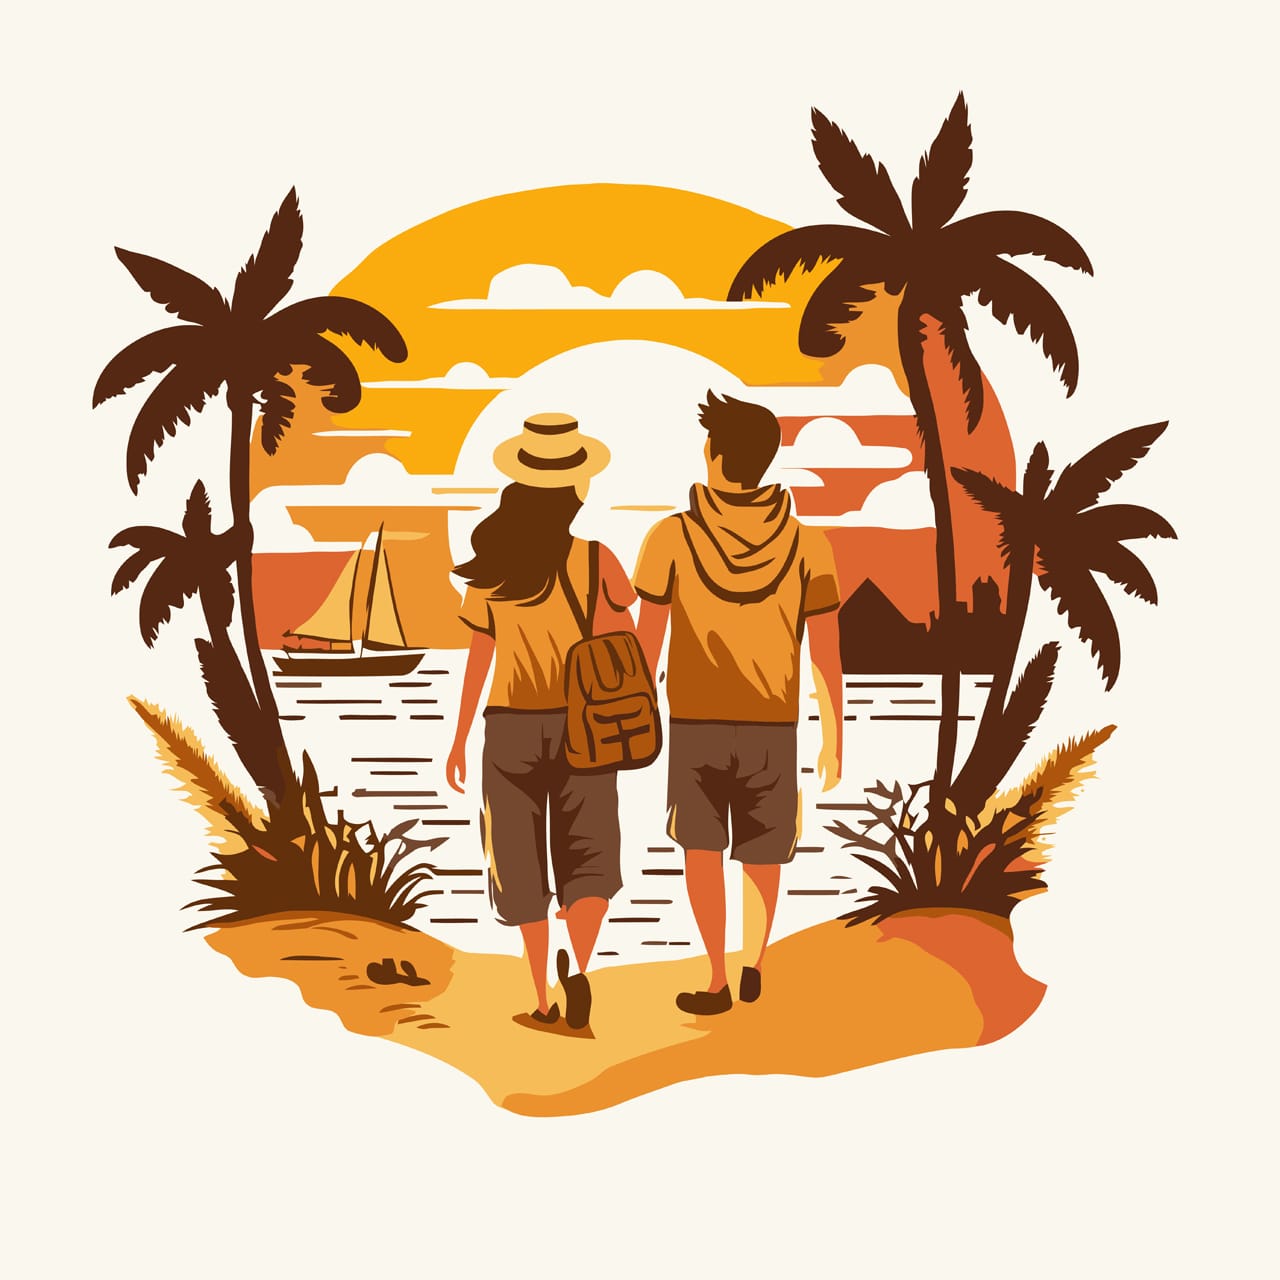 Travelling couple logo going go vacation concept cartoon image